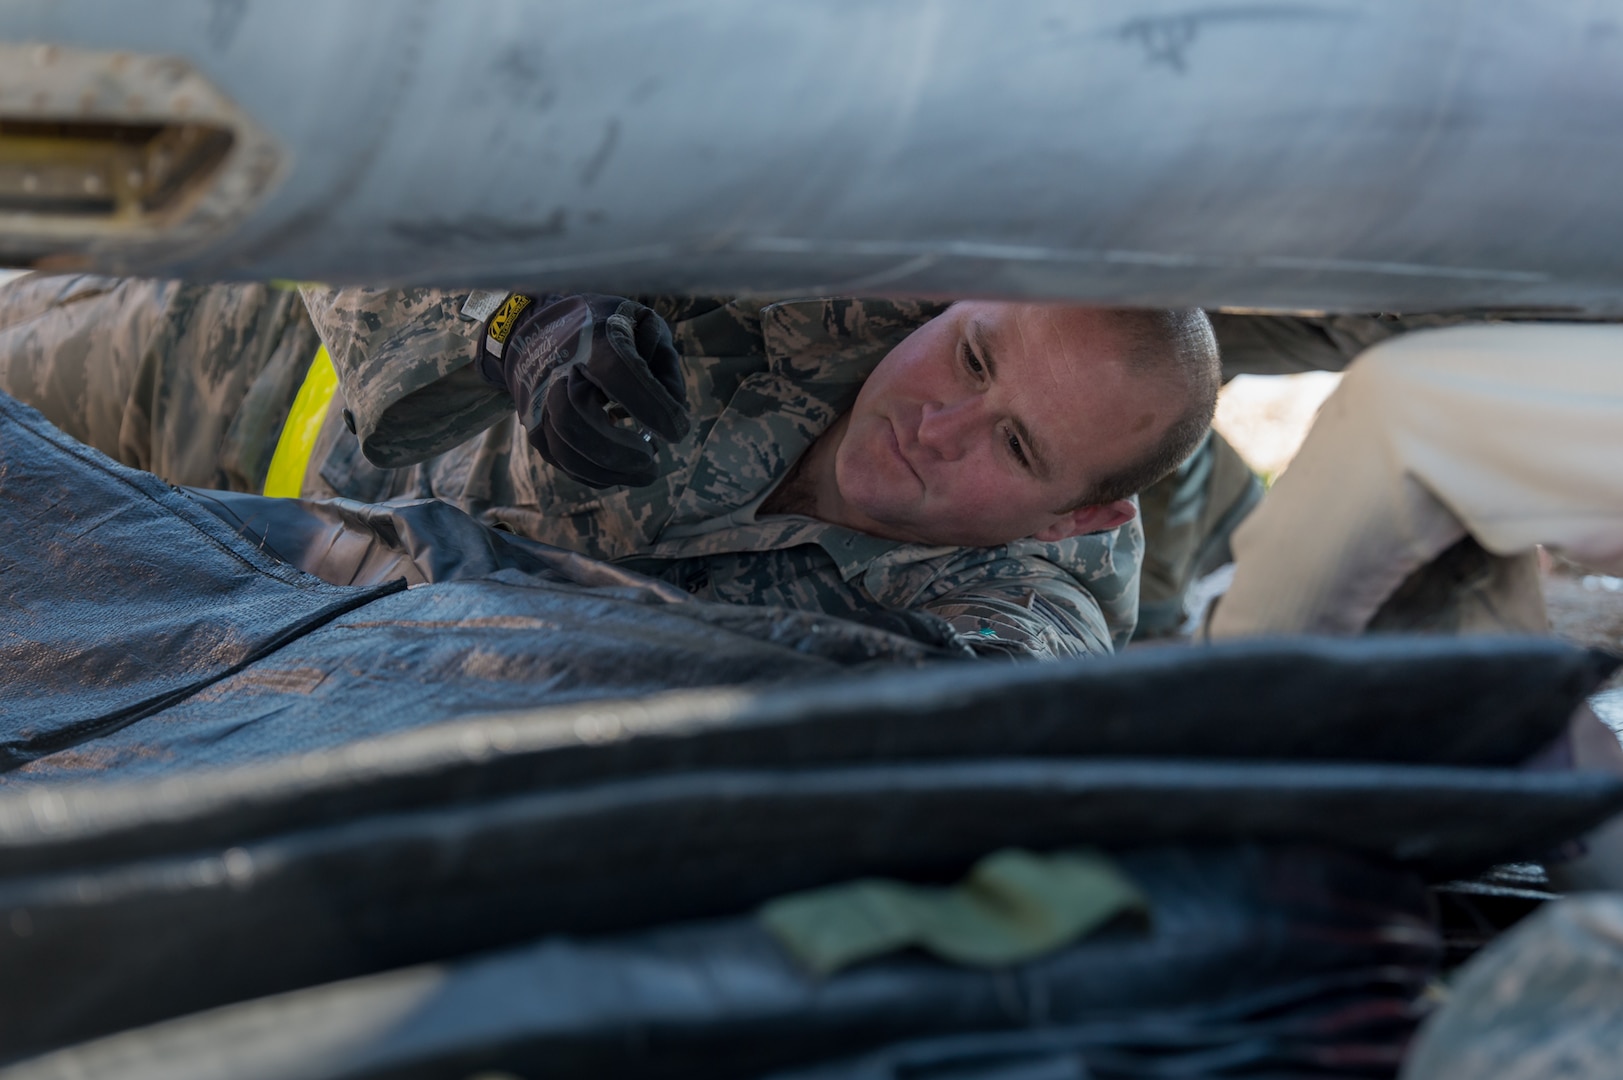 U.S. Air Force Tech. Sgt. Jeremy Mullin, aircraft fuel system specialist with the 153rd Maintenance Group's Crash Damage or Disabled Aircraft Recovery team configures an air bag for inflation prior to jacking an A-7 Corsair II aircraft, May 11, 2017 in Cheyenne, Wyoming. Maintainers from all aircraft specialties practiced moving a fighter aircraft from the mud into a parking spot as part of an annual CDDAR requirement. (U.S. Air National Guard photo by Senior Master Sgt. Charles Delano/released)